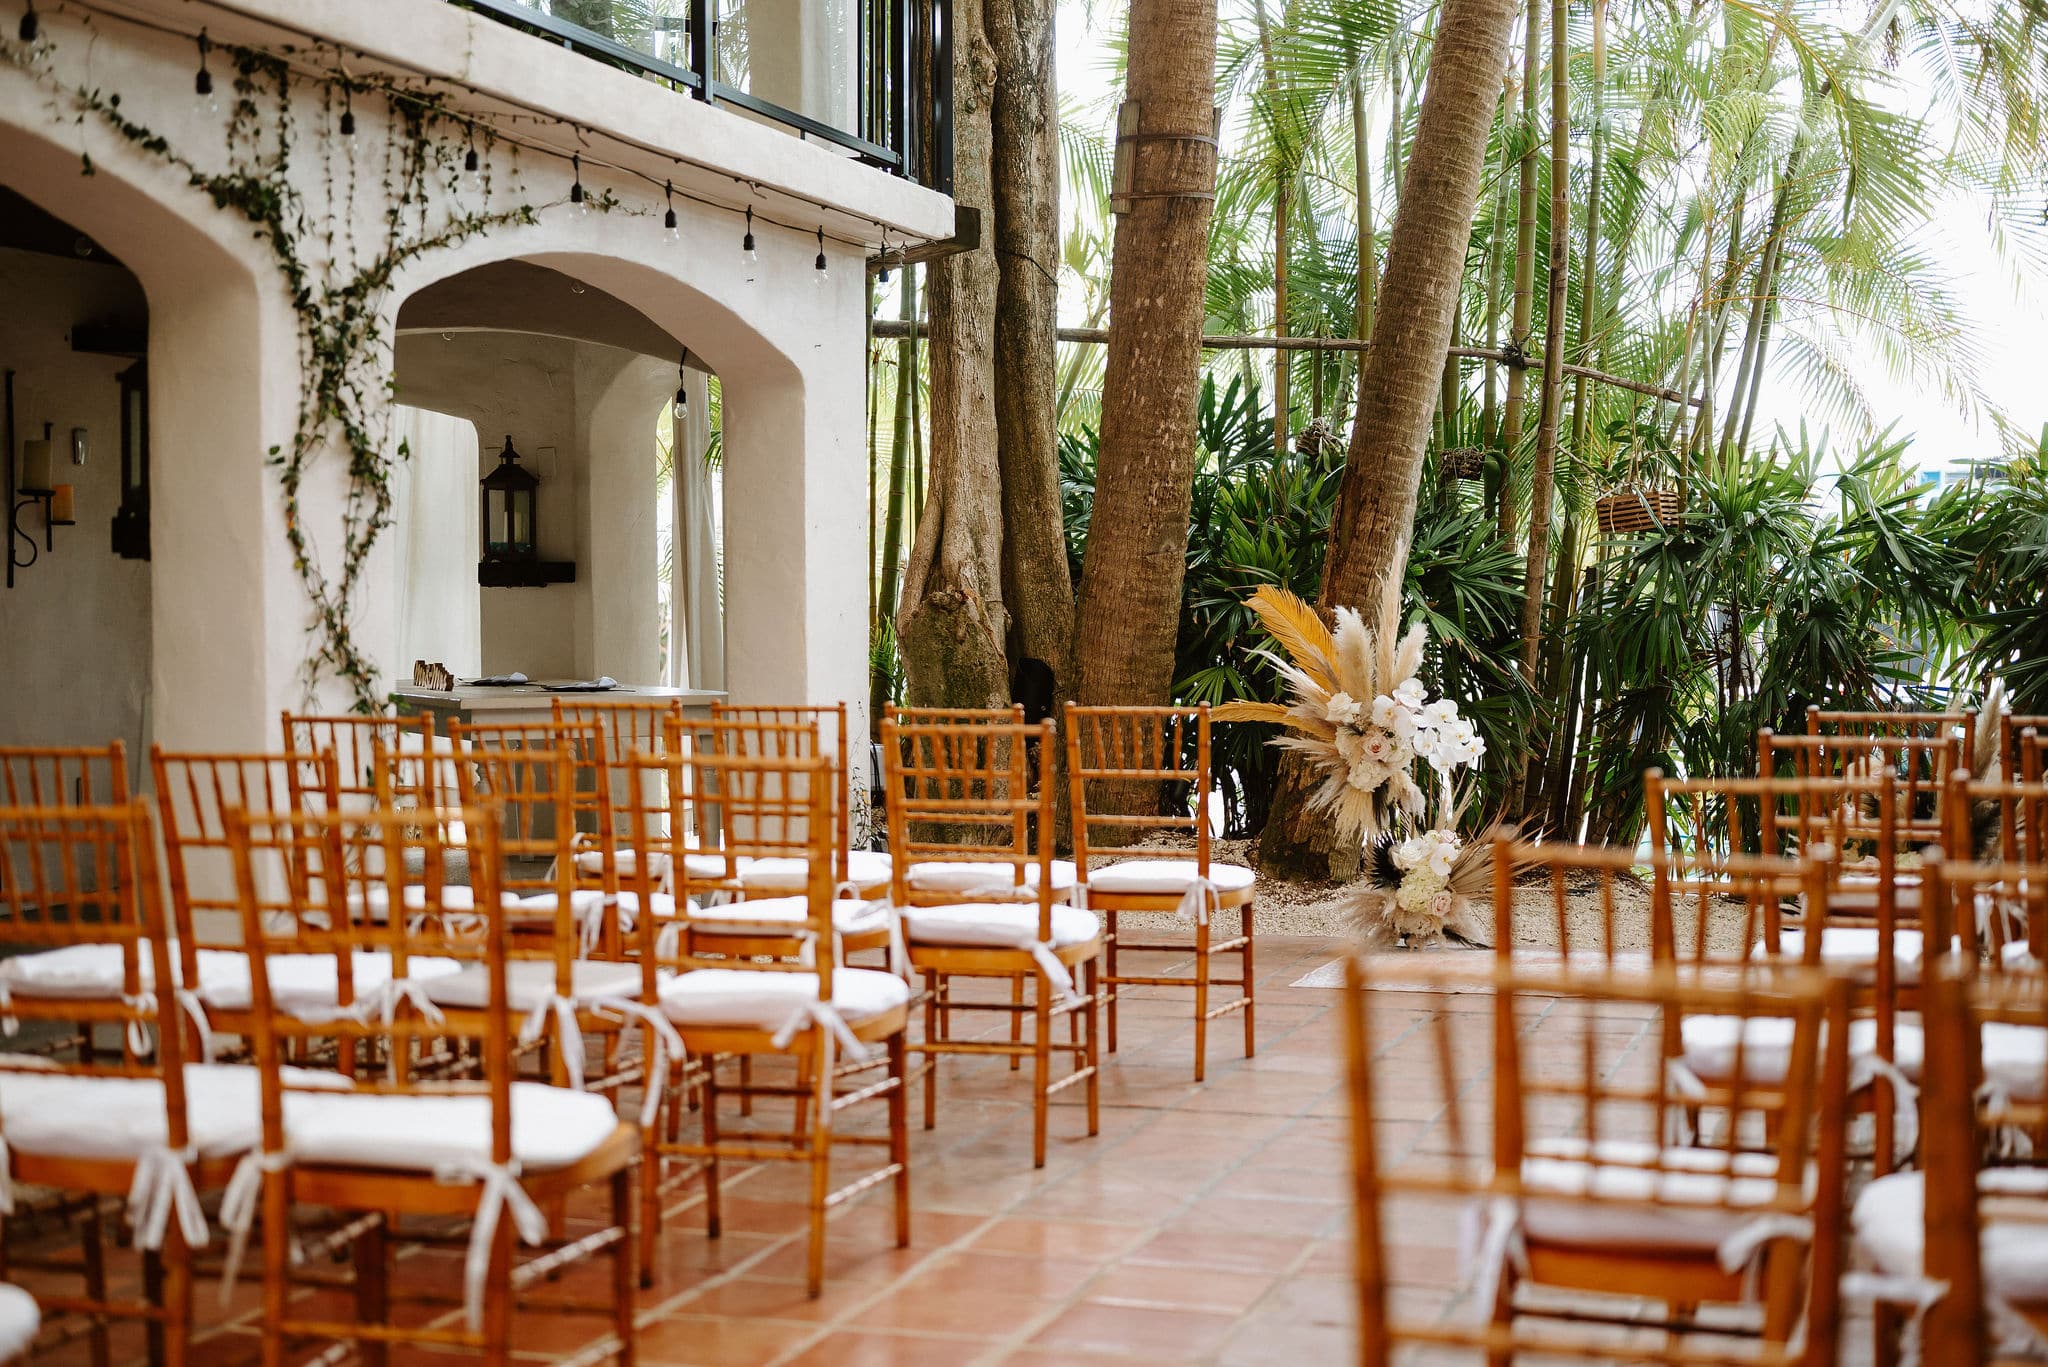 Ceremony chair rentals by Atlas Event Rental